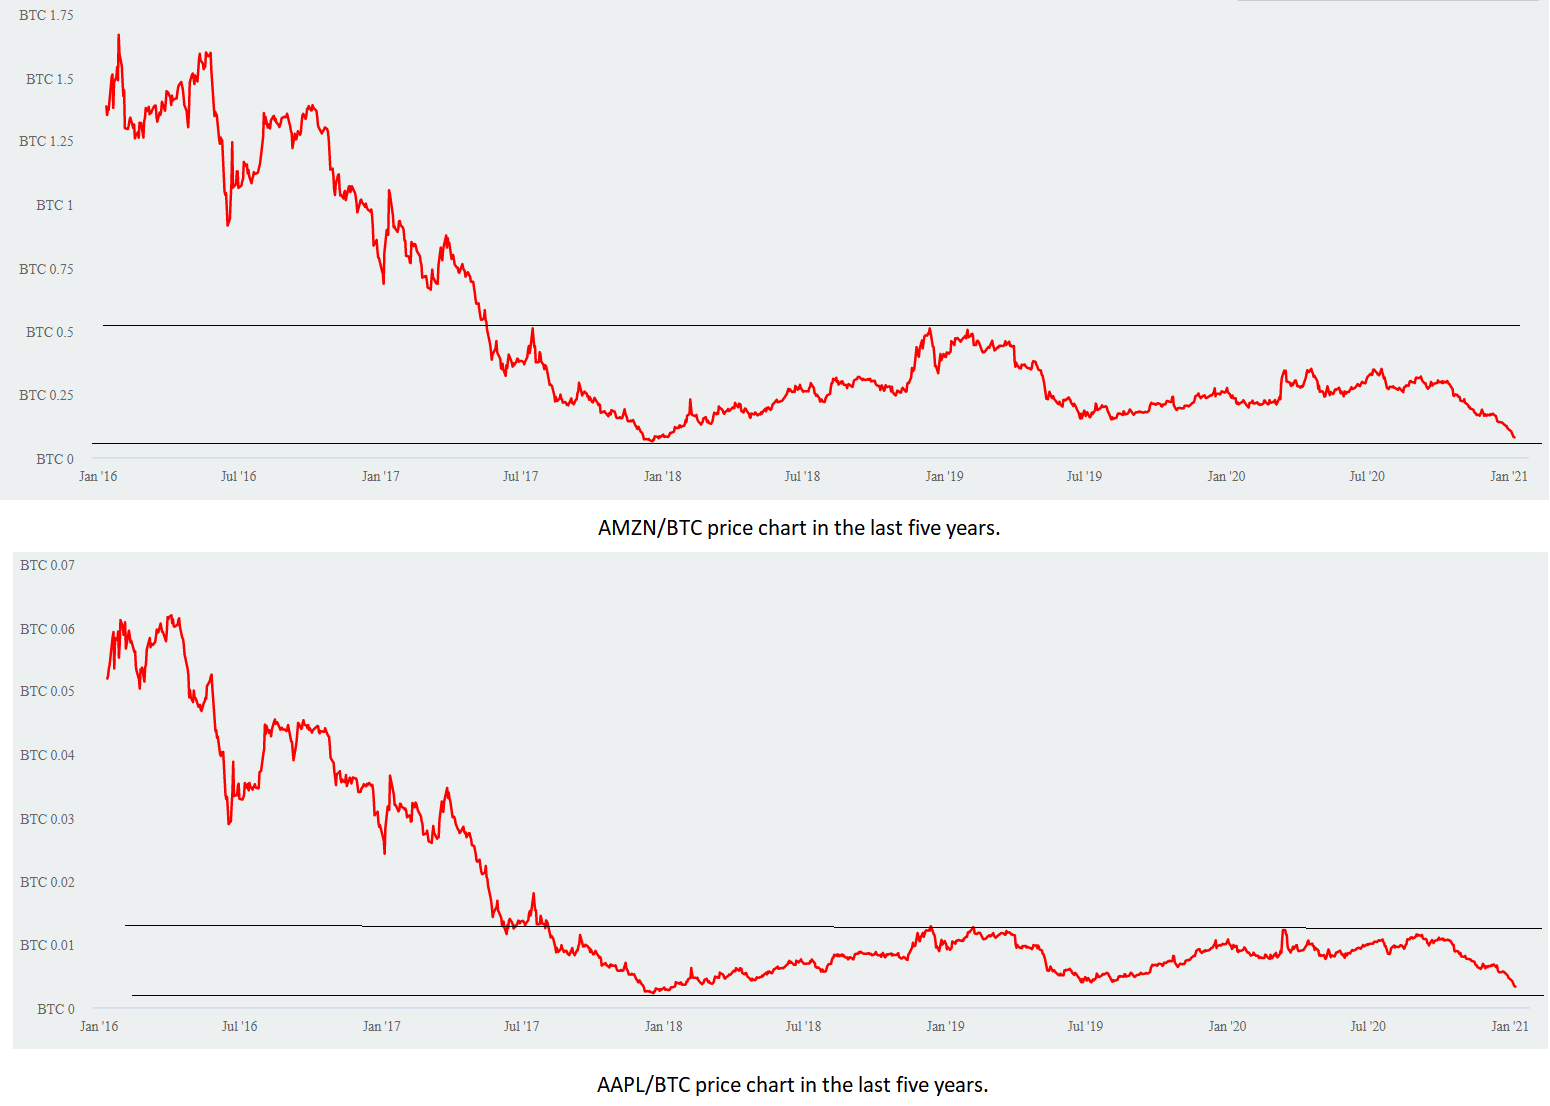 AMZN/BTC and AAPL/BTC price chart in the last five years. Source: StonksinBTC